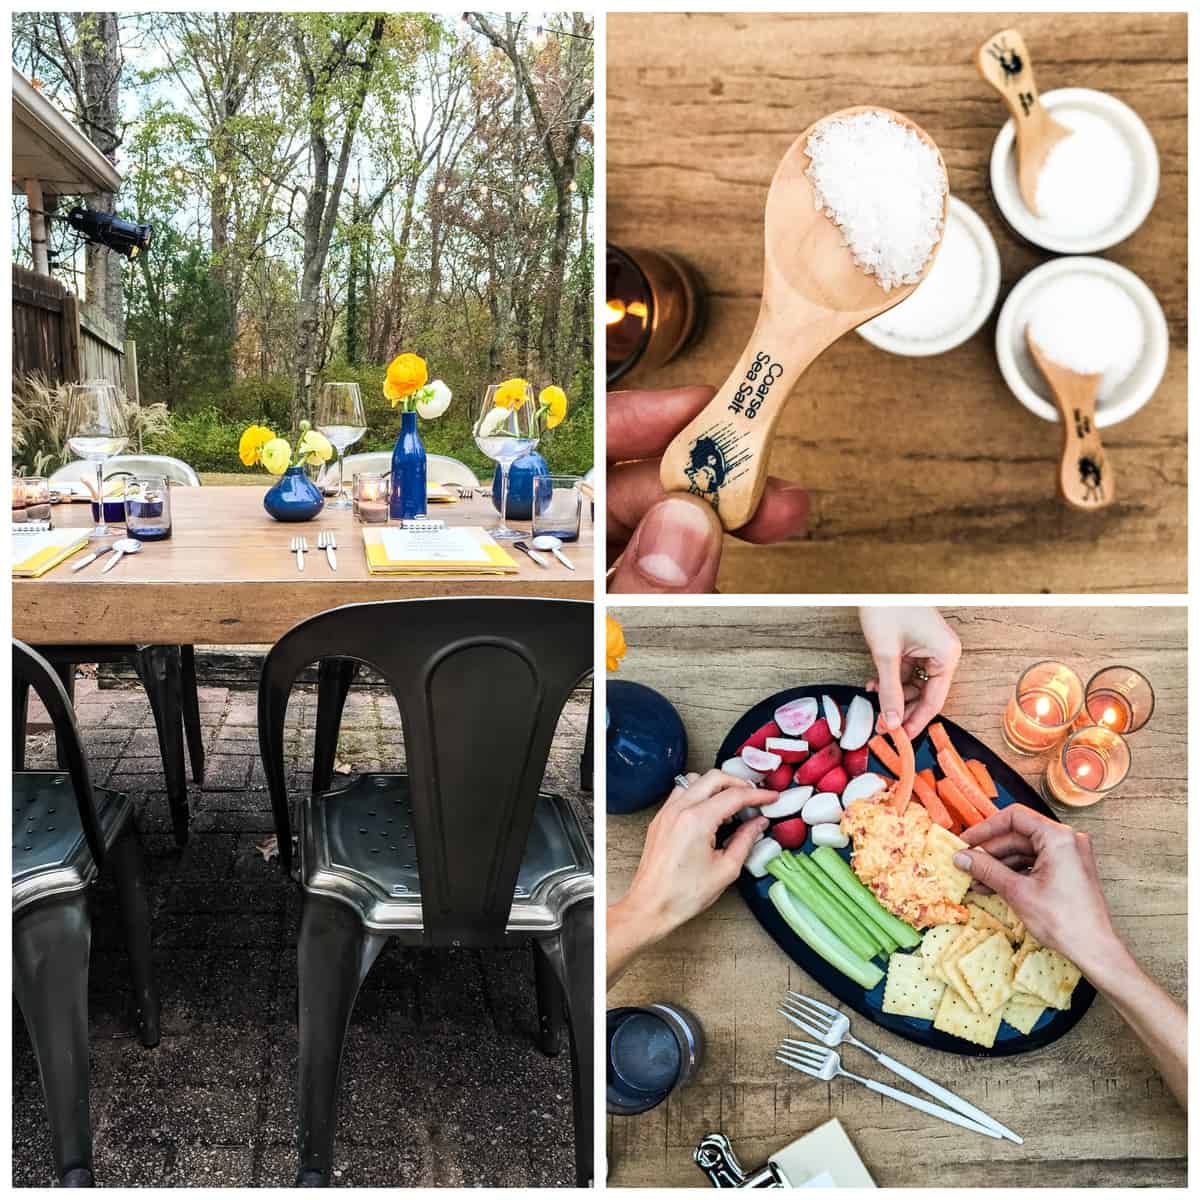 a collage of a nicely set outdoor table, a hand holding up a tablespoon of salt above bowls and more measuring spoons of salt, and hands grabbing veggies and crackers from a veggie tray.